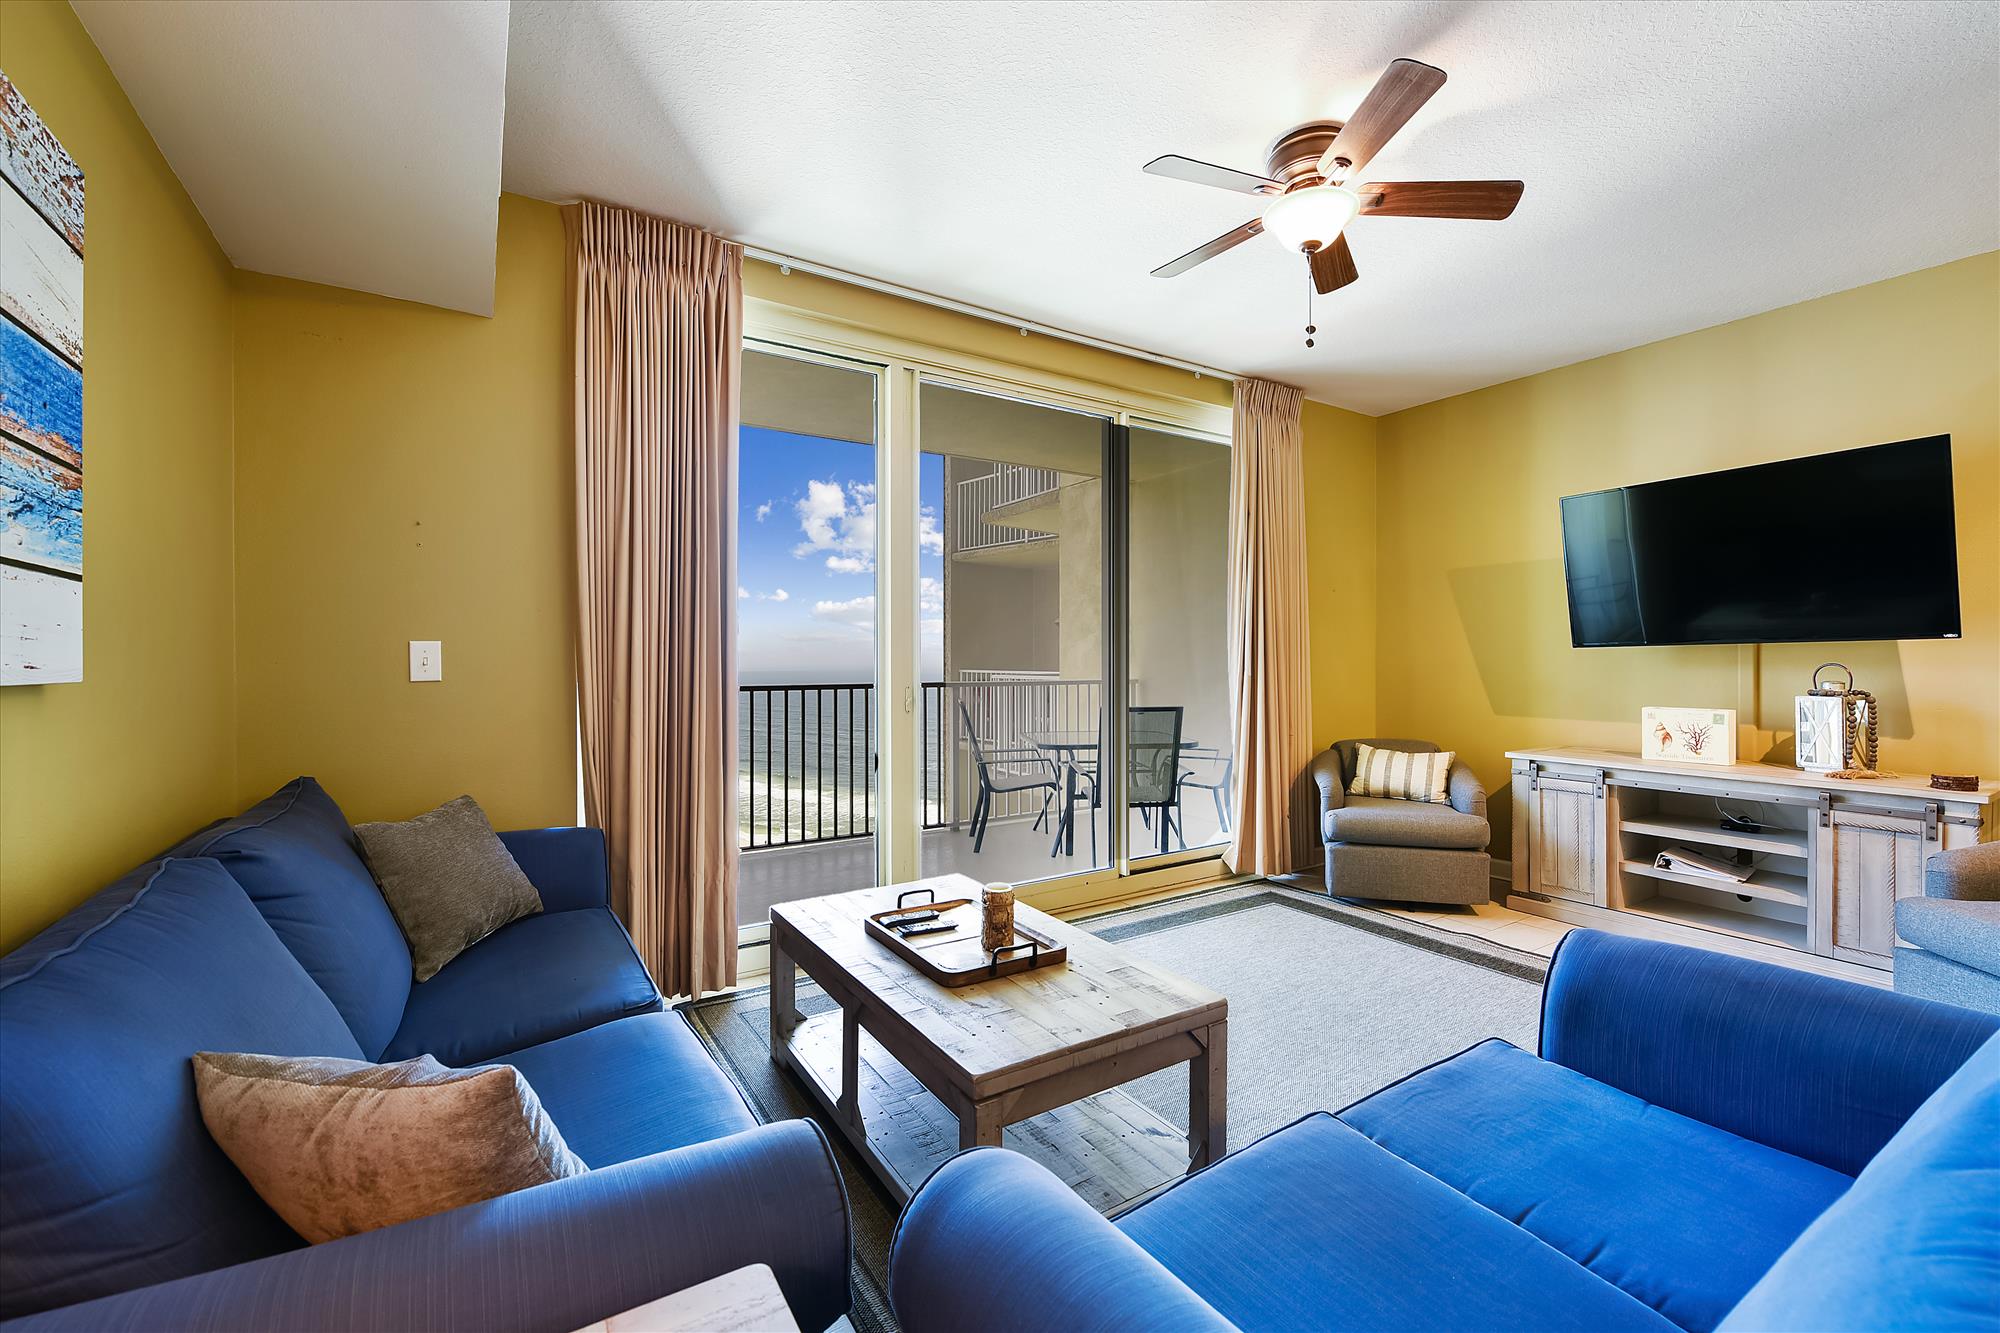 The living room in one of our Panama City Beach house rentals